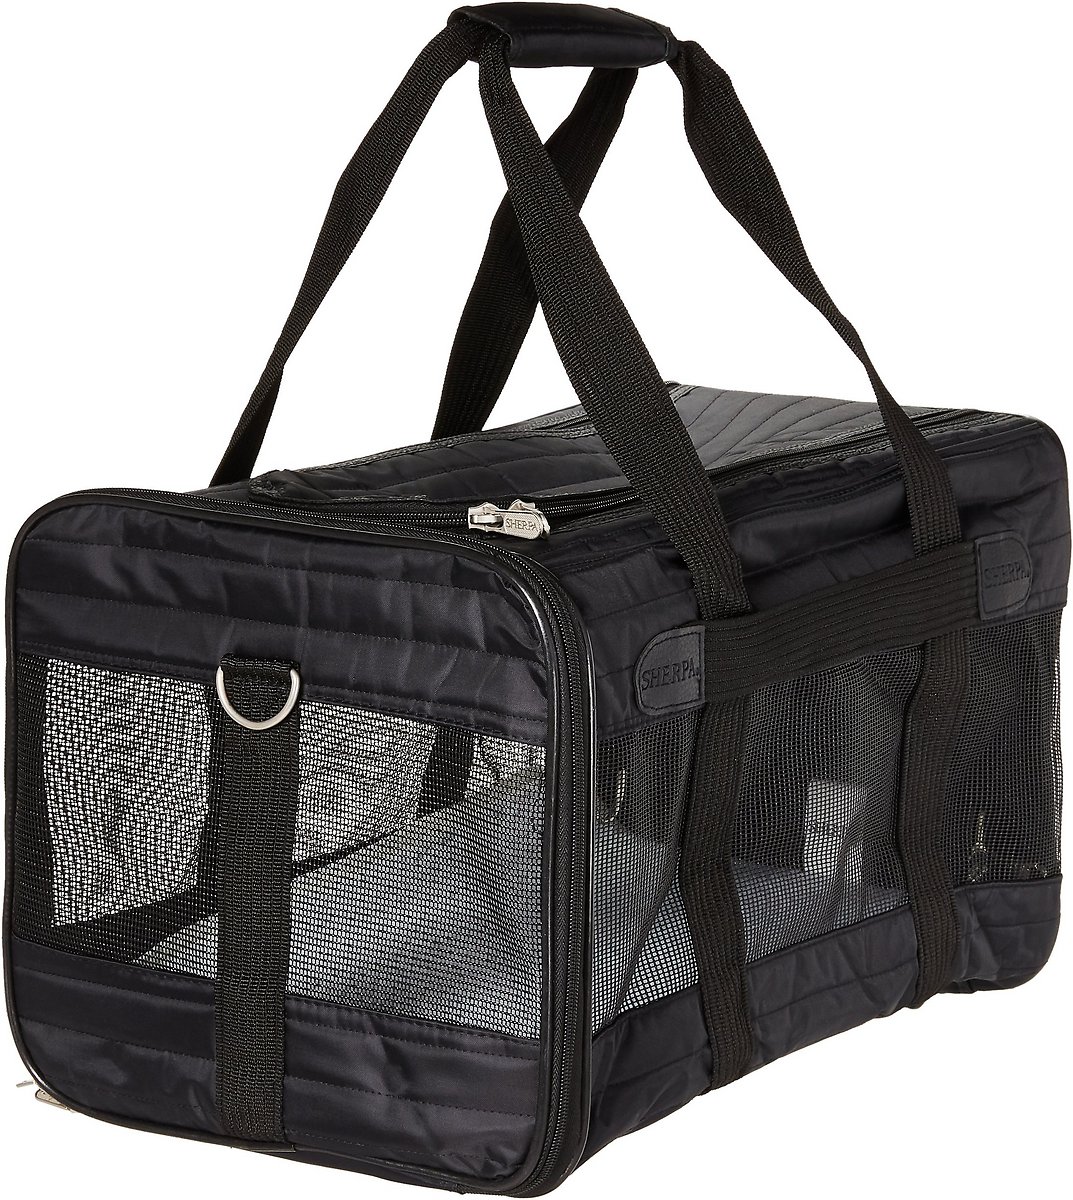 Sherpa Original Deluxe Airline-Approved Dog & Cat Carrier Bag, Large